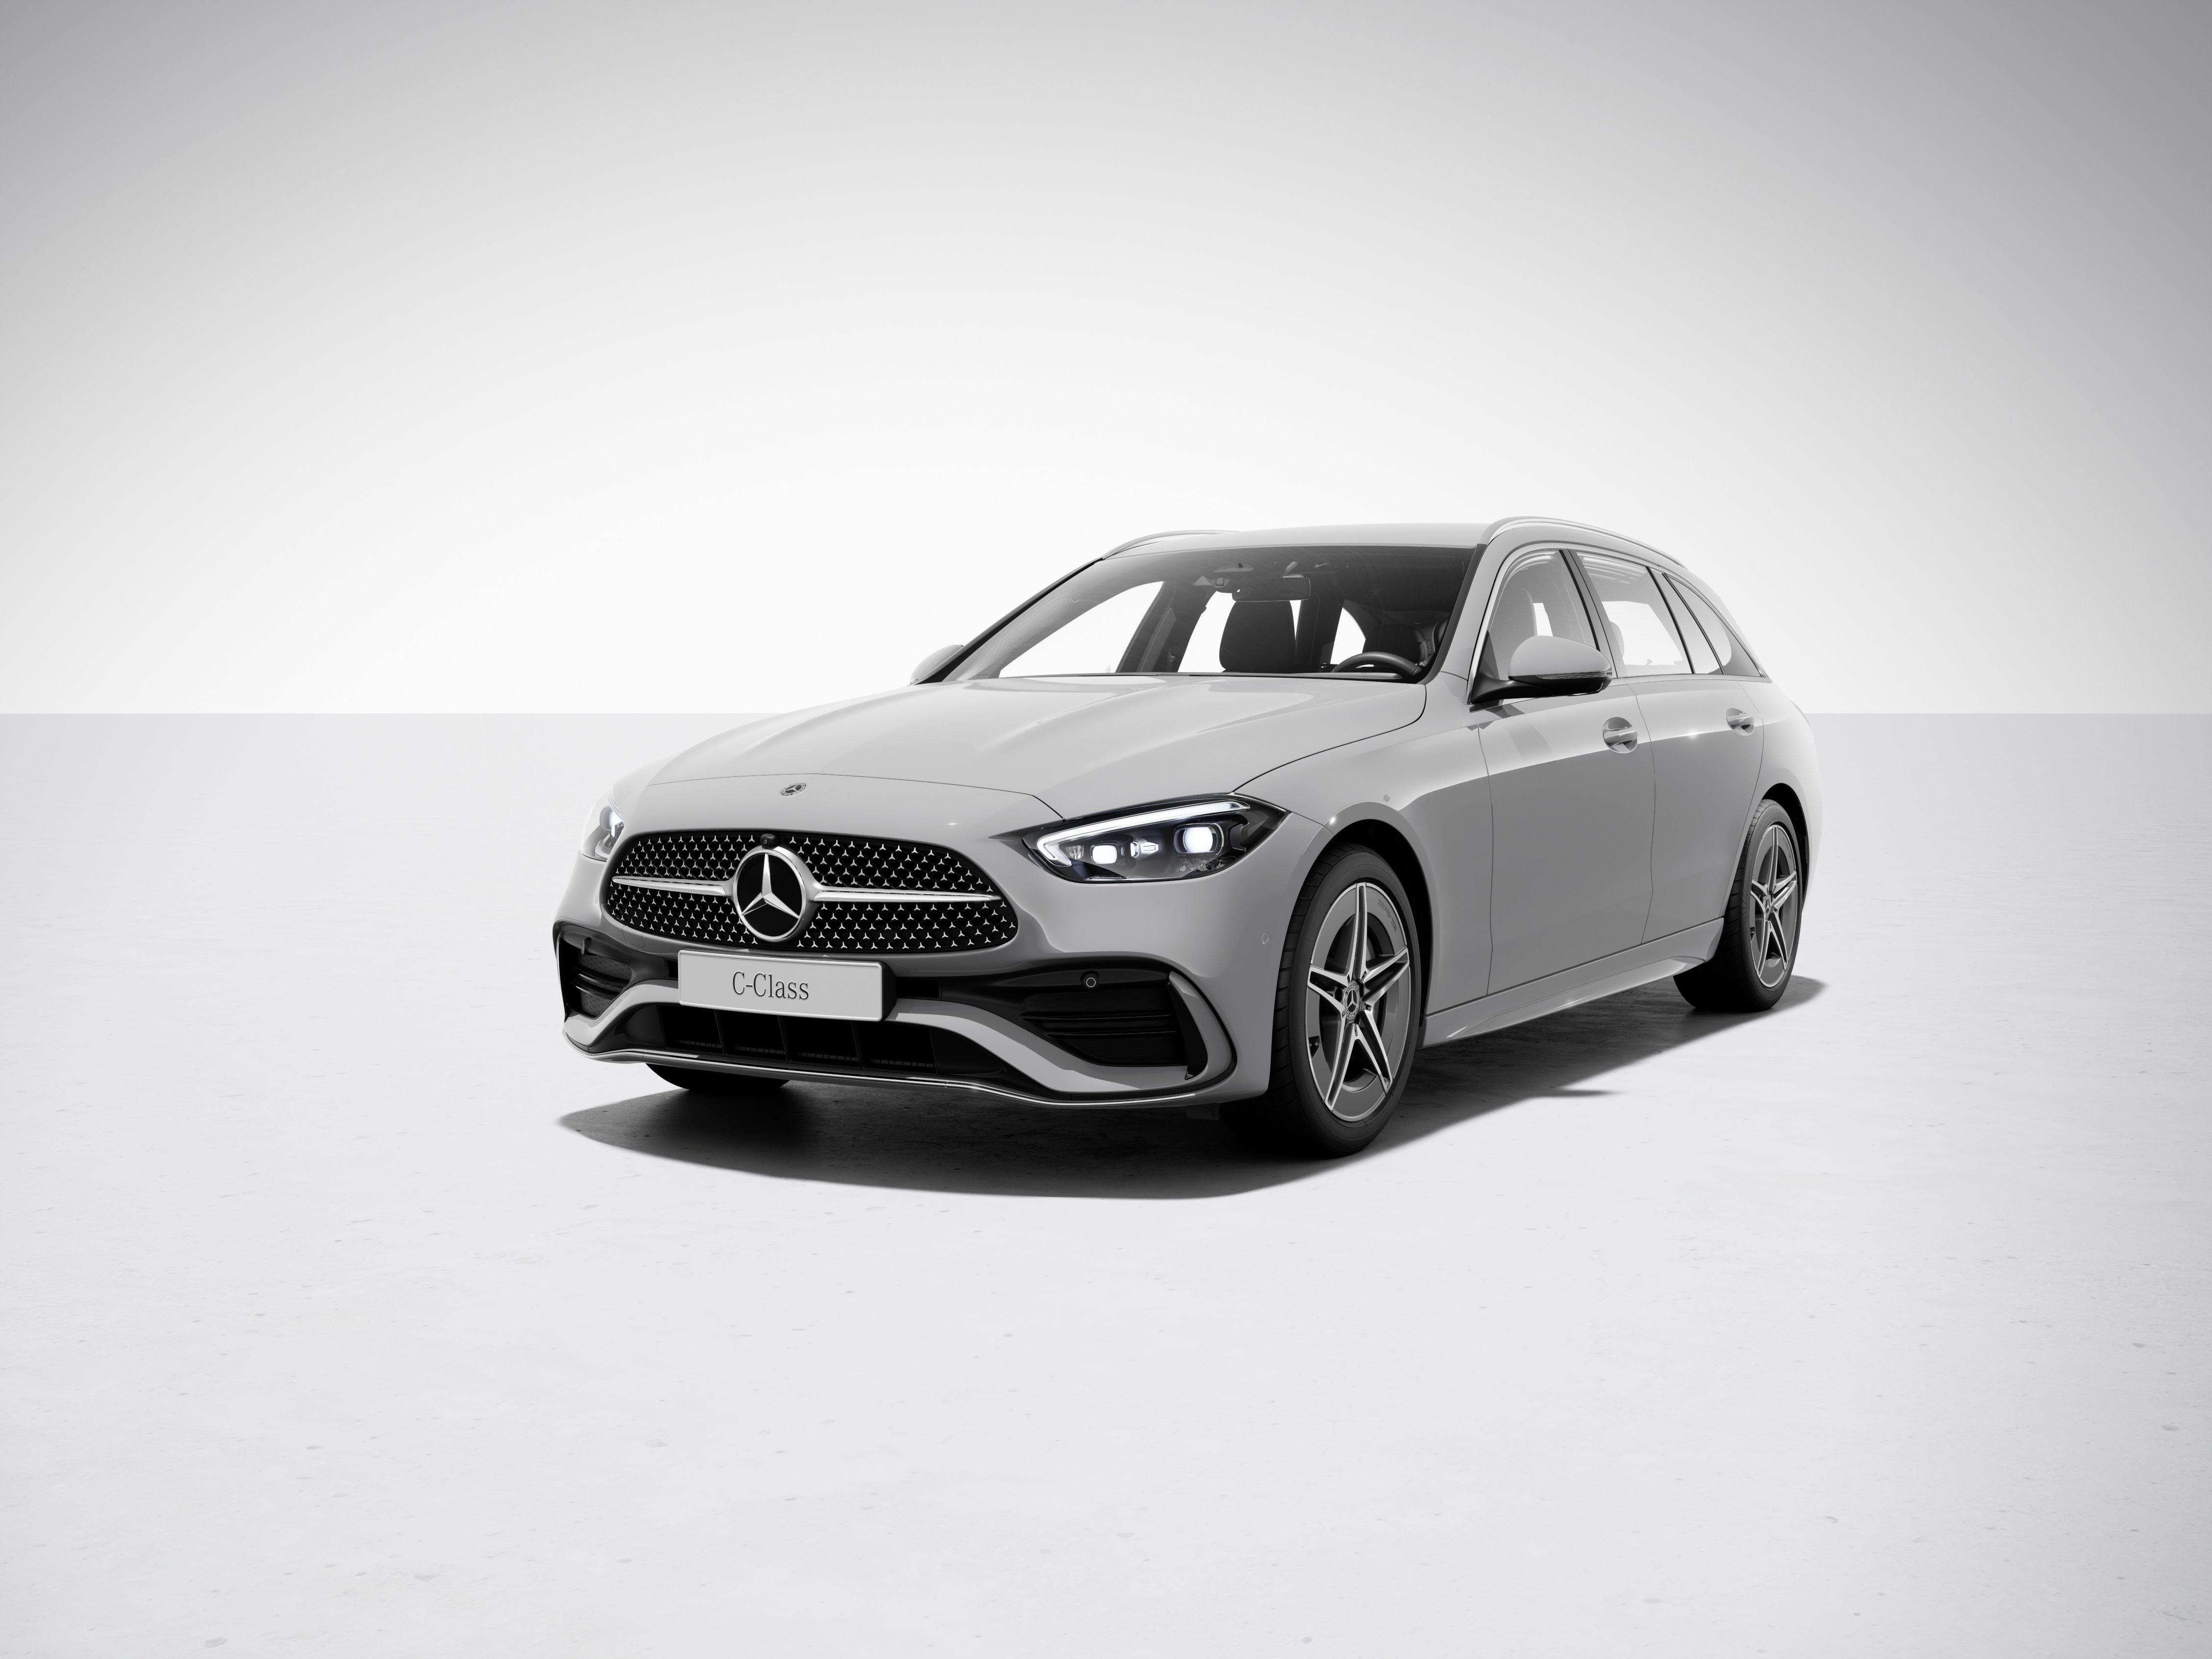 C-Class & GLC Get Smarter: Personalized Entertainment & New Options